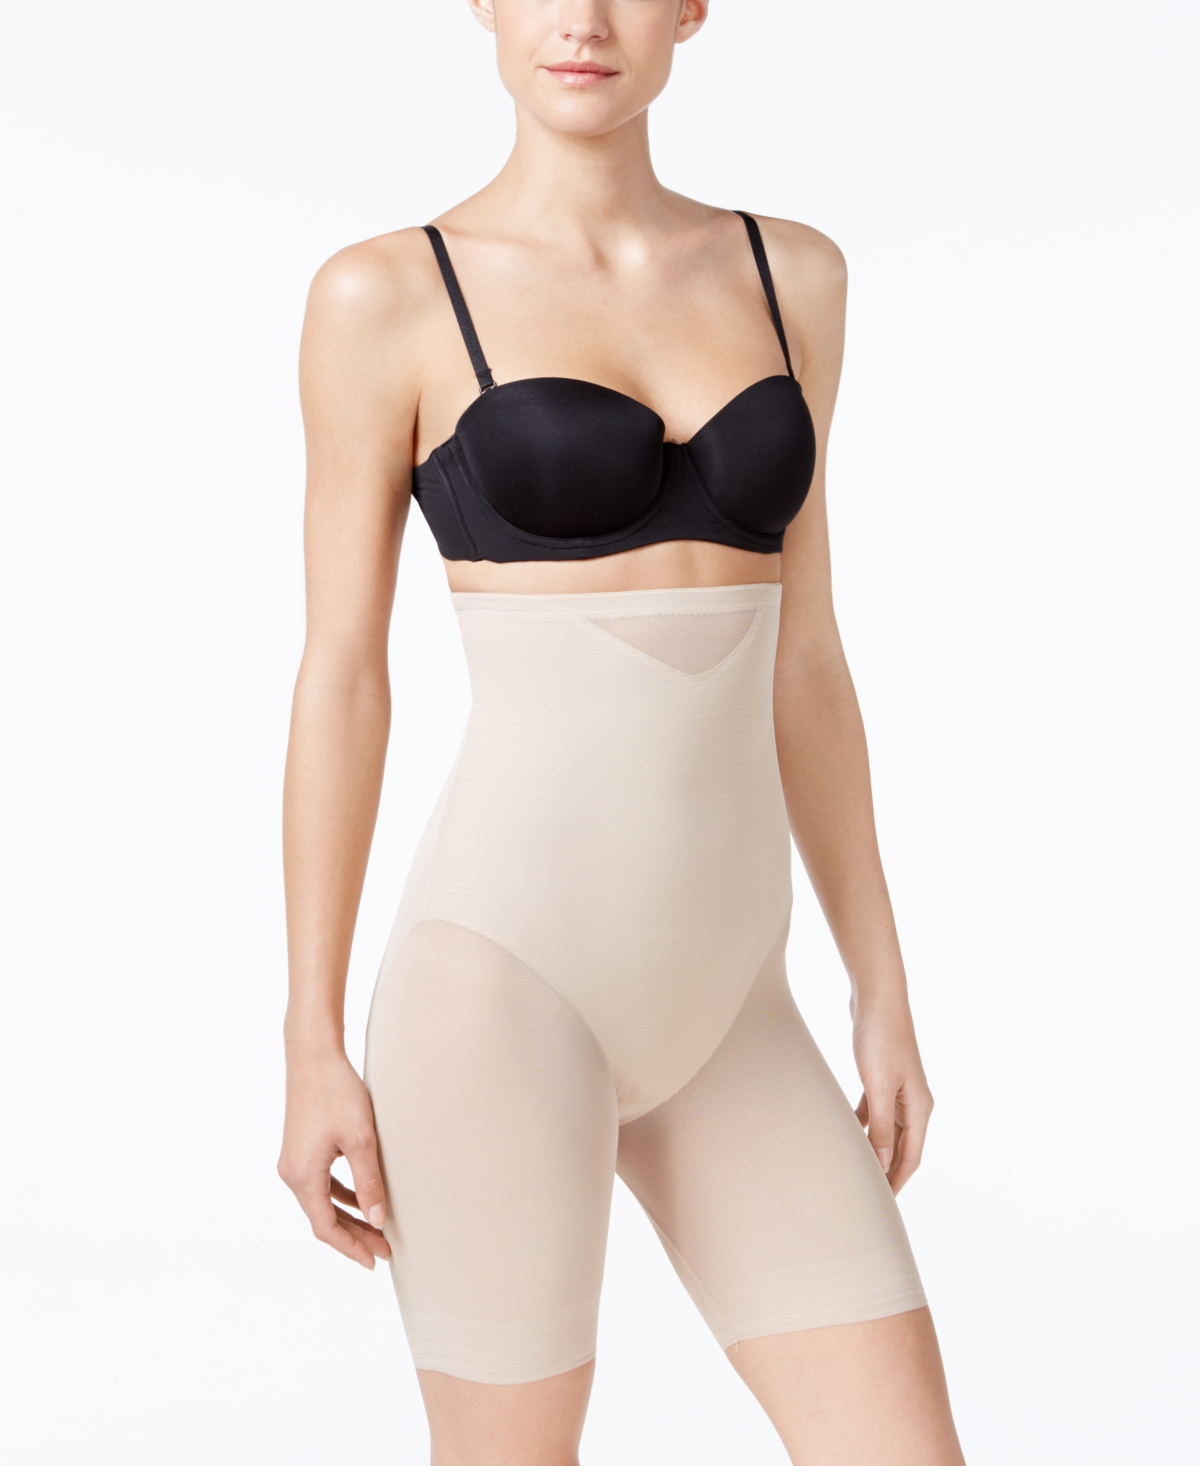 UPC 080225350425 product image for Miraclesuit Women's Extra Firm Tummy-Control Sheer Trim Thigh Slimmer 2789 | upcitemdb.com